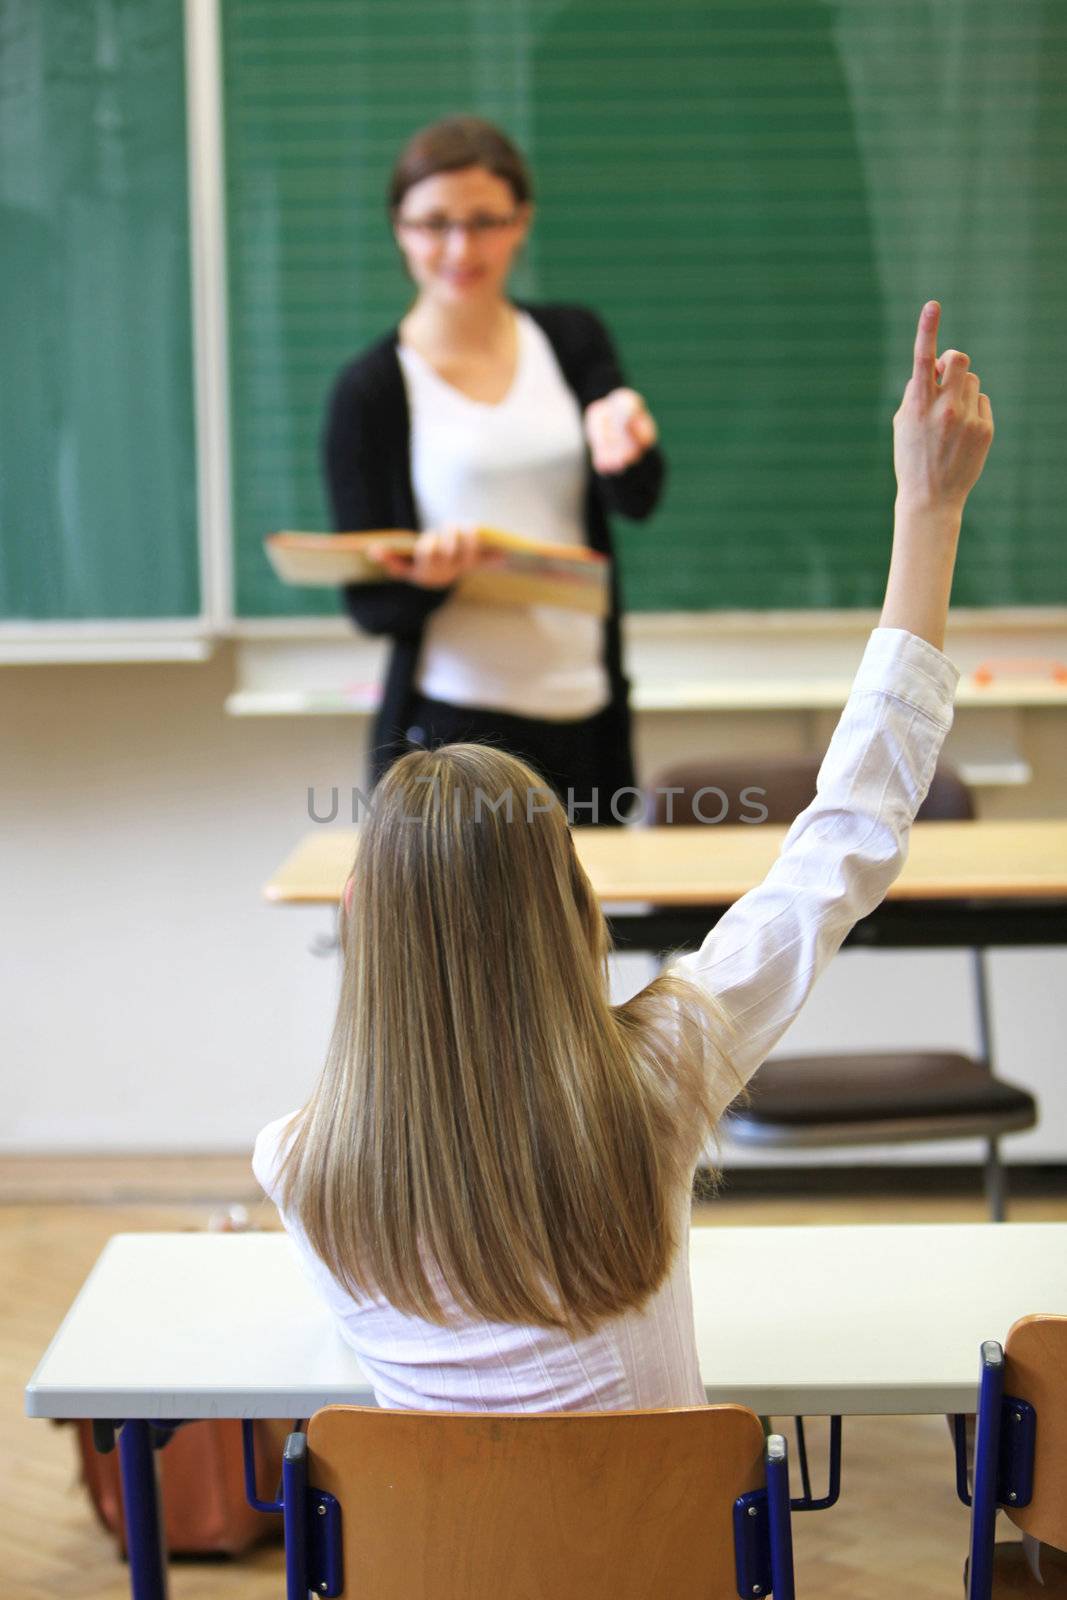 Basic student in primary school shows. In the background is the teacher with a book in front of the blackboard